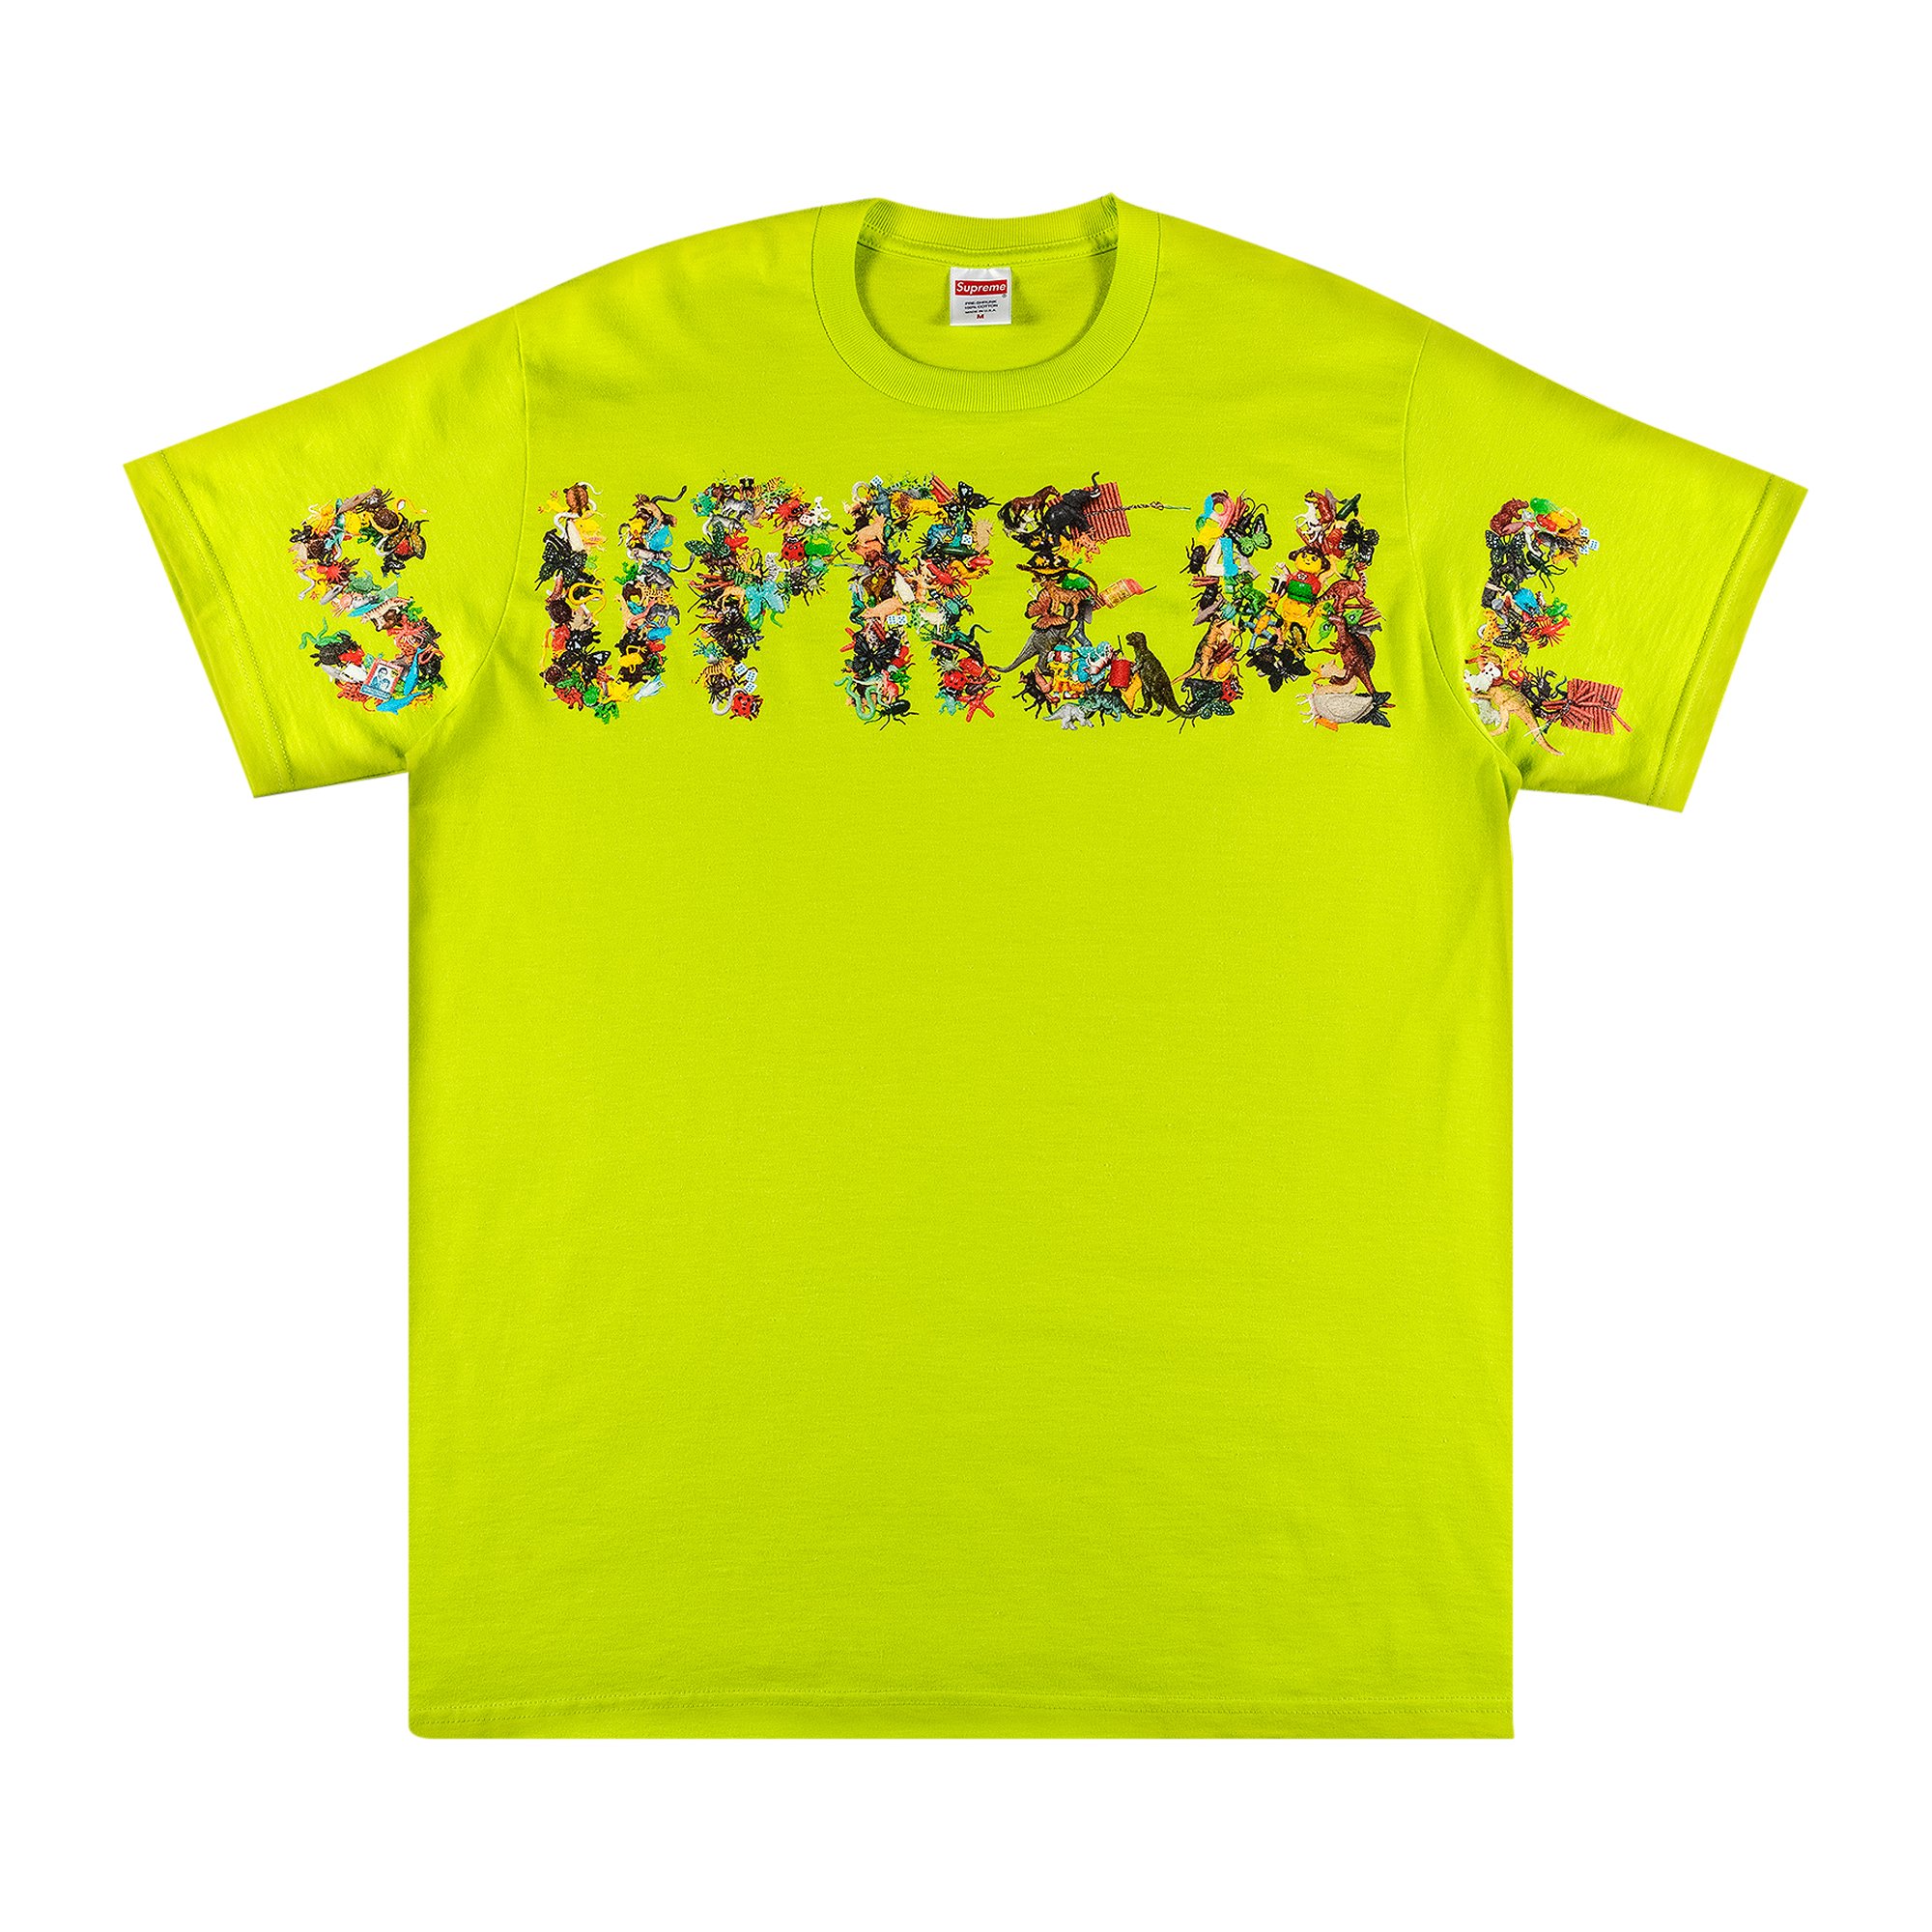 Buy Supreme Toy Pile Tee 'Bright Green' - SS21T39 BRIGHT GREEN | GOAT